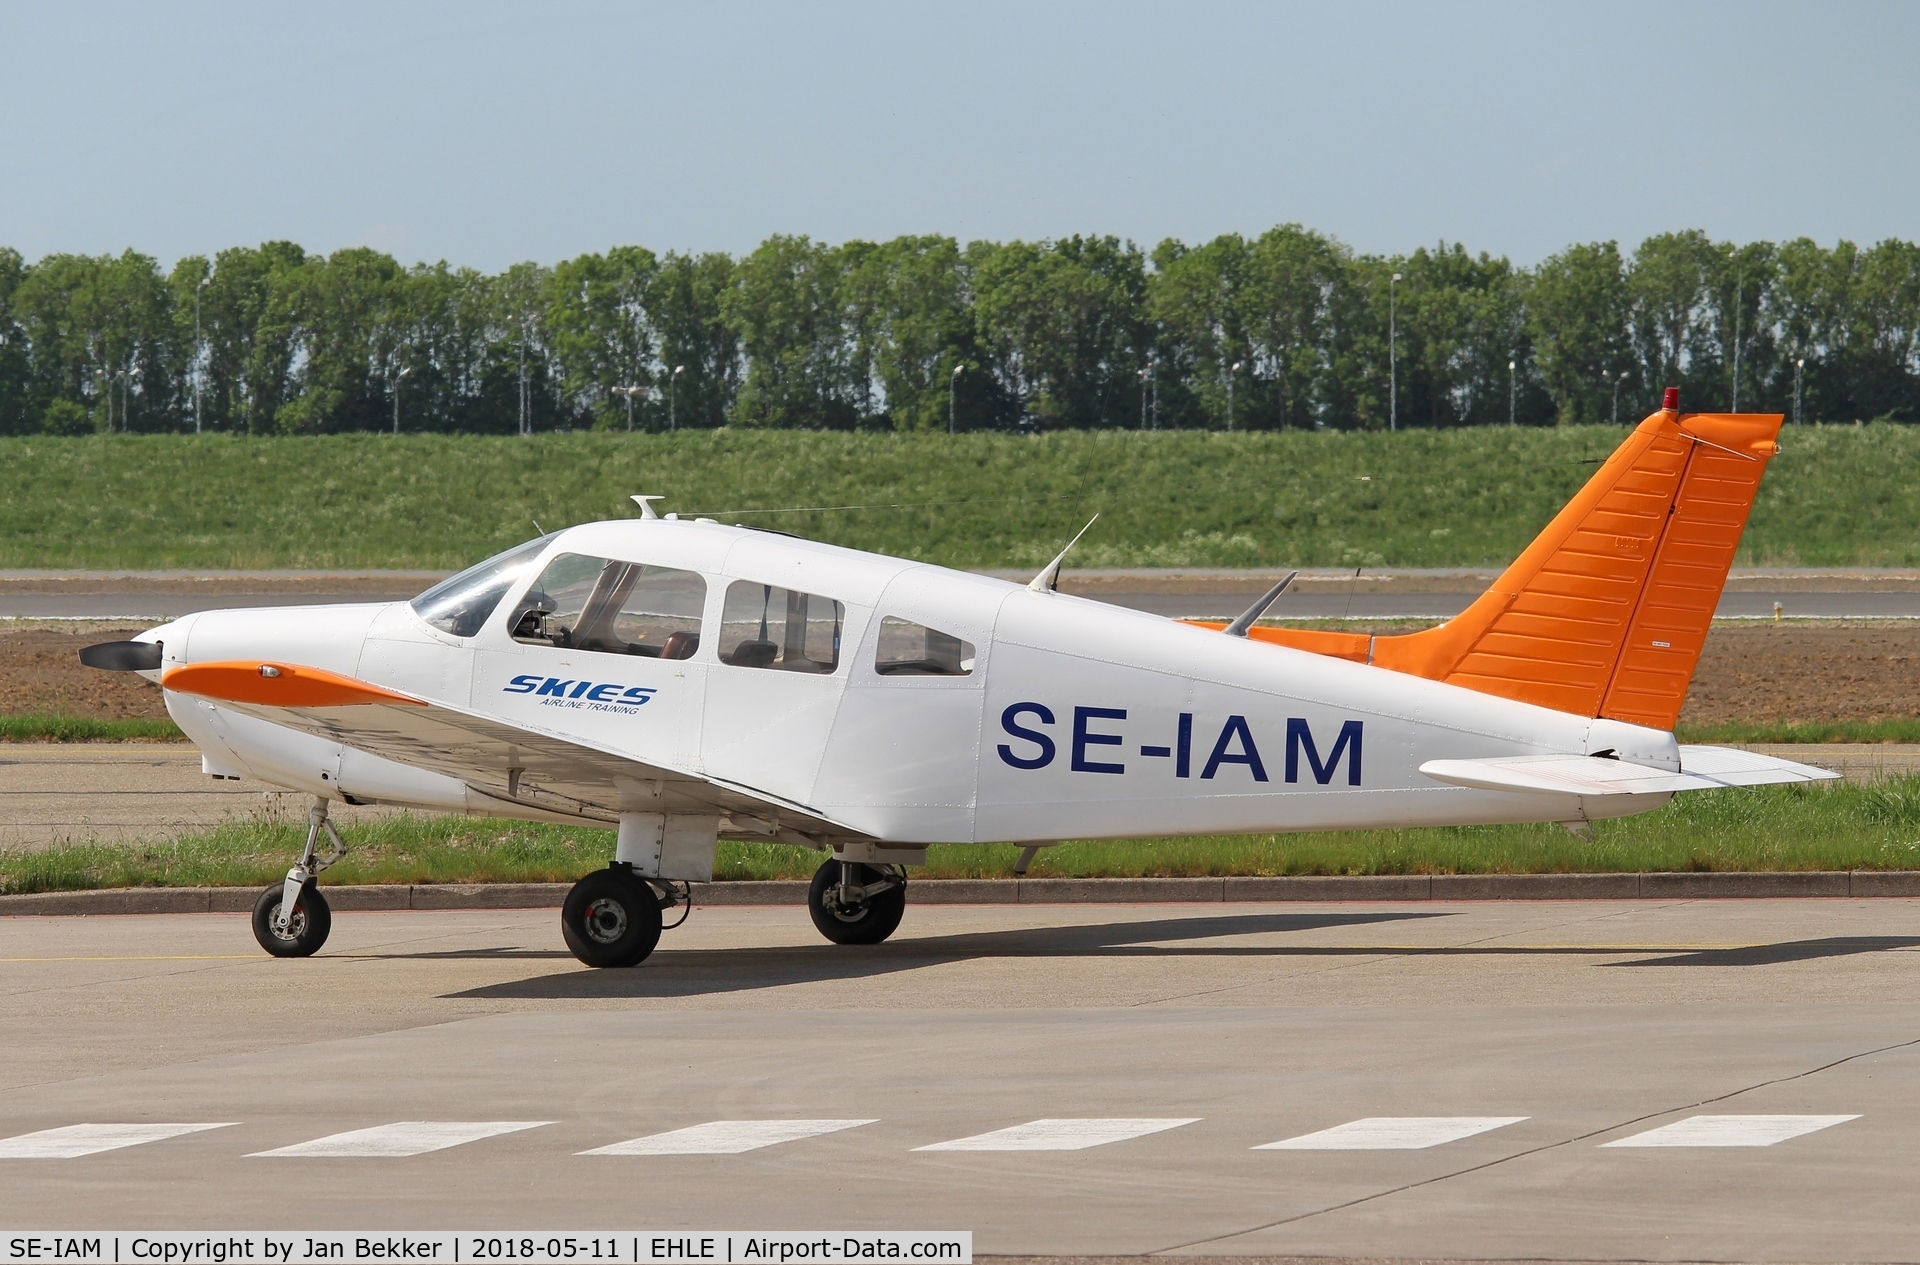 SE-IAM, 1976 Piper PA-28-161 Warrior II C/N 28-7816651, Lelystad Airport. Probably the aircraft is sold and on its way to its new ownwer (in the UK?)